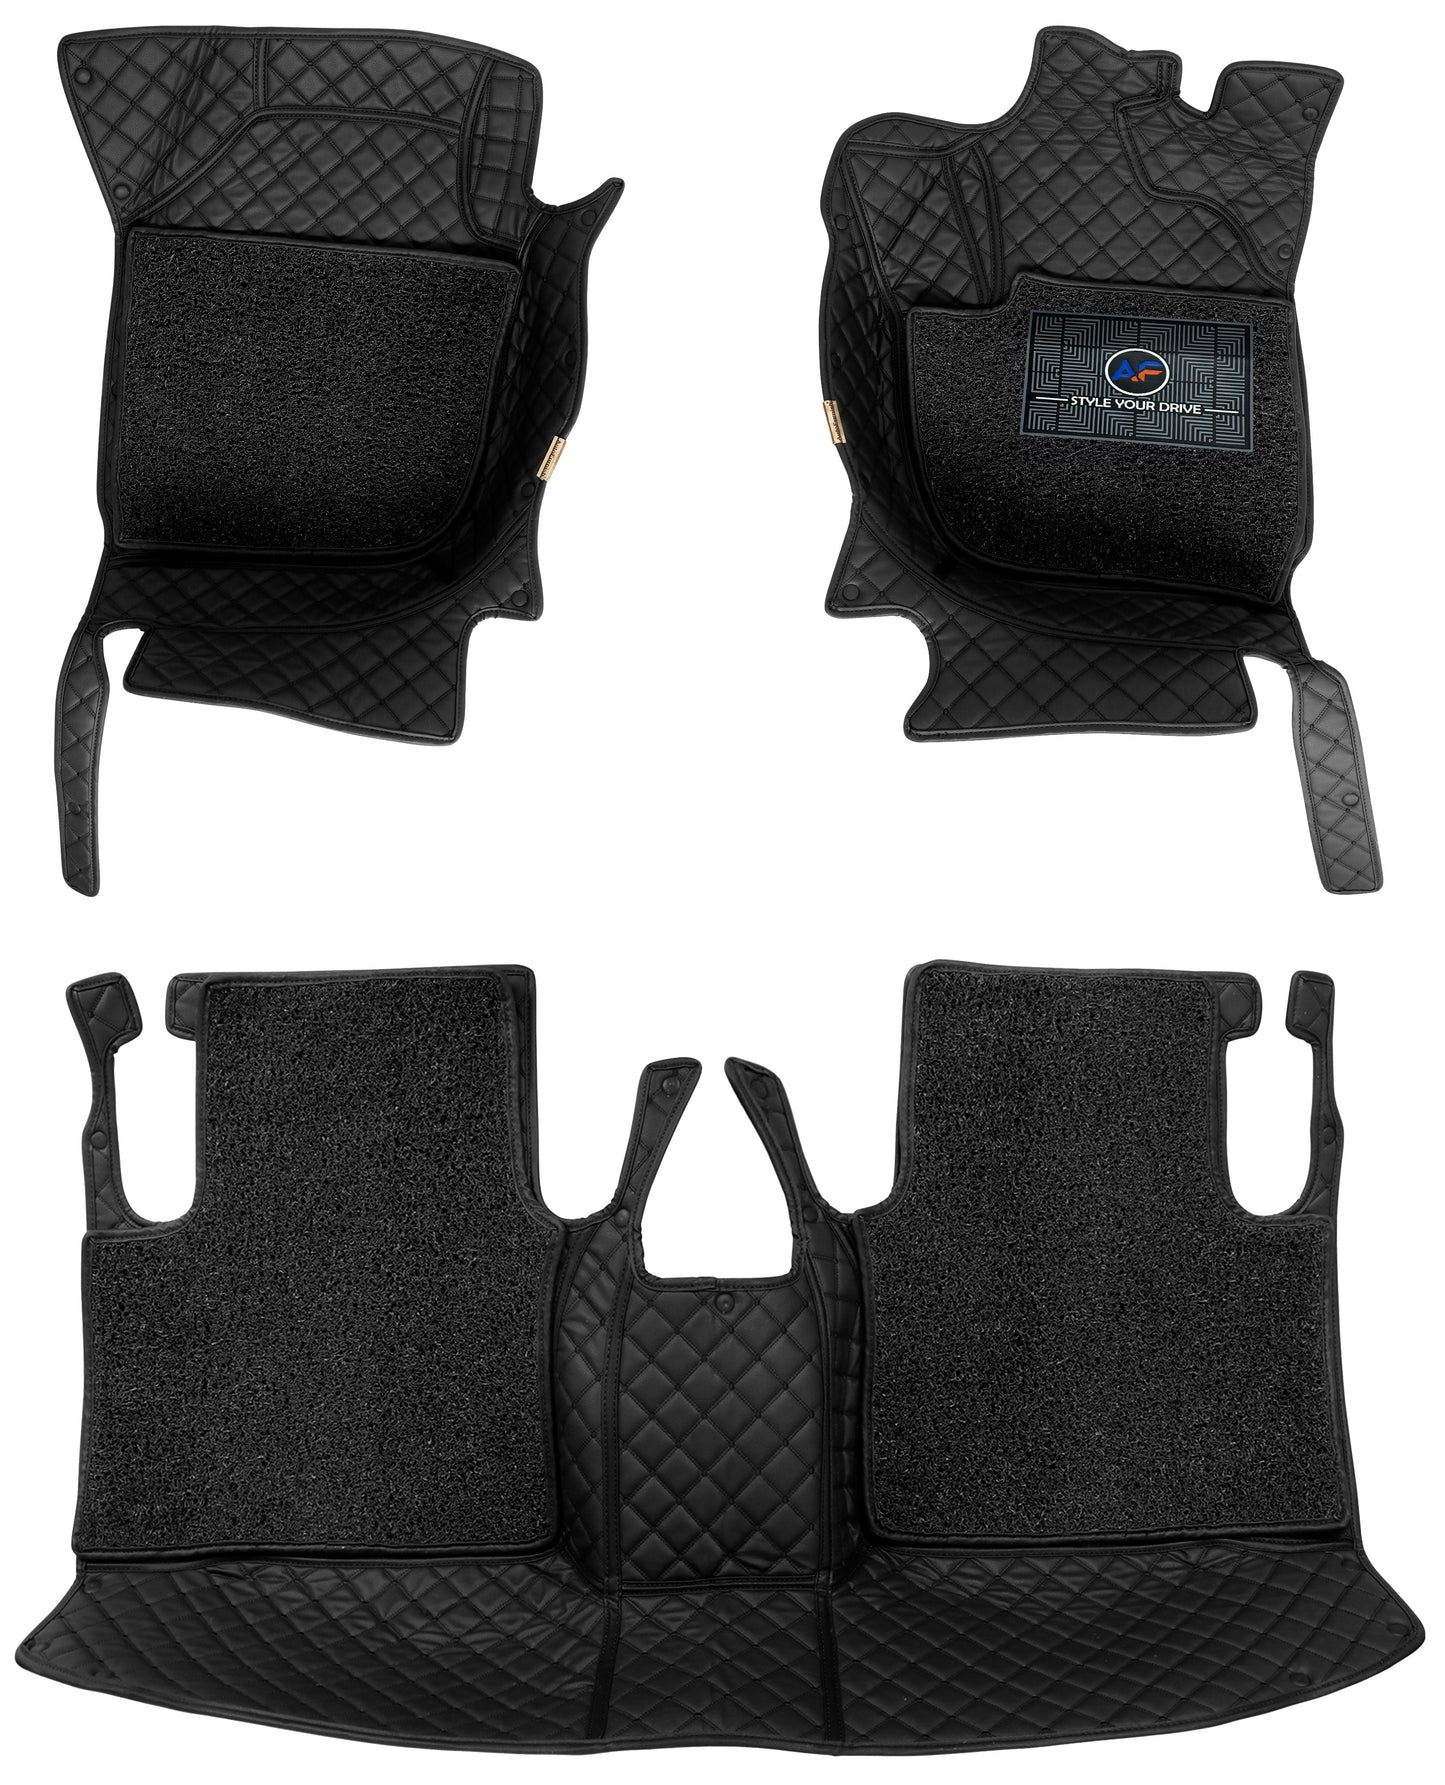 Ford EcoSport 2013-16 7D Luxury Car Mat, All Weather Proof, Anti-Skid, 100% Waterproof & Odorless with Unique Diamond Fish Design (24mm Luxury PU Leather, 2 Rows)